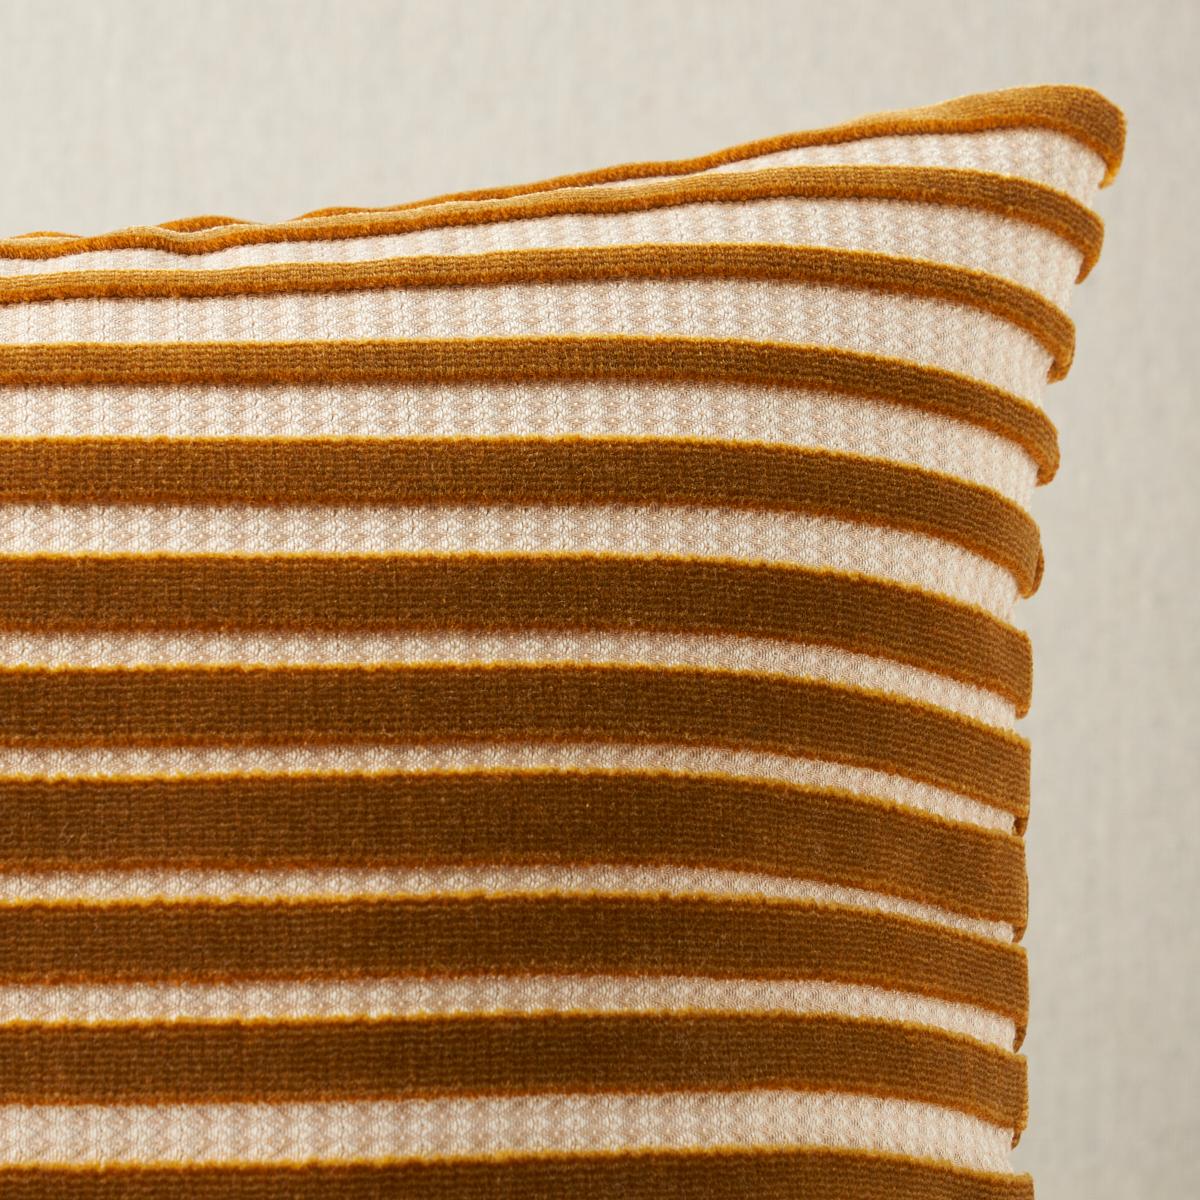 This pillow features Chimay Stripe Velvet with a knife edge finish. This luxurious textural design features multiwidth velvet stripes with subtle strié effects and a delicate diamond jacquard pattern woven into the background. Pillow includes a